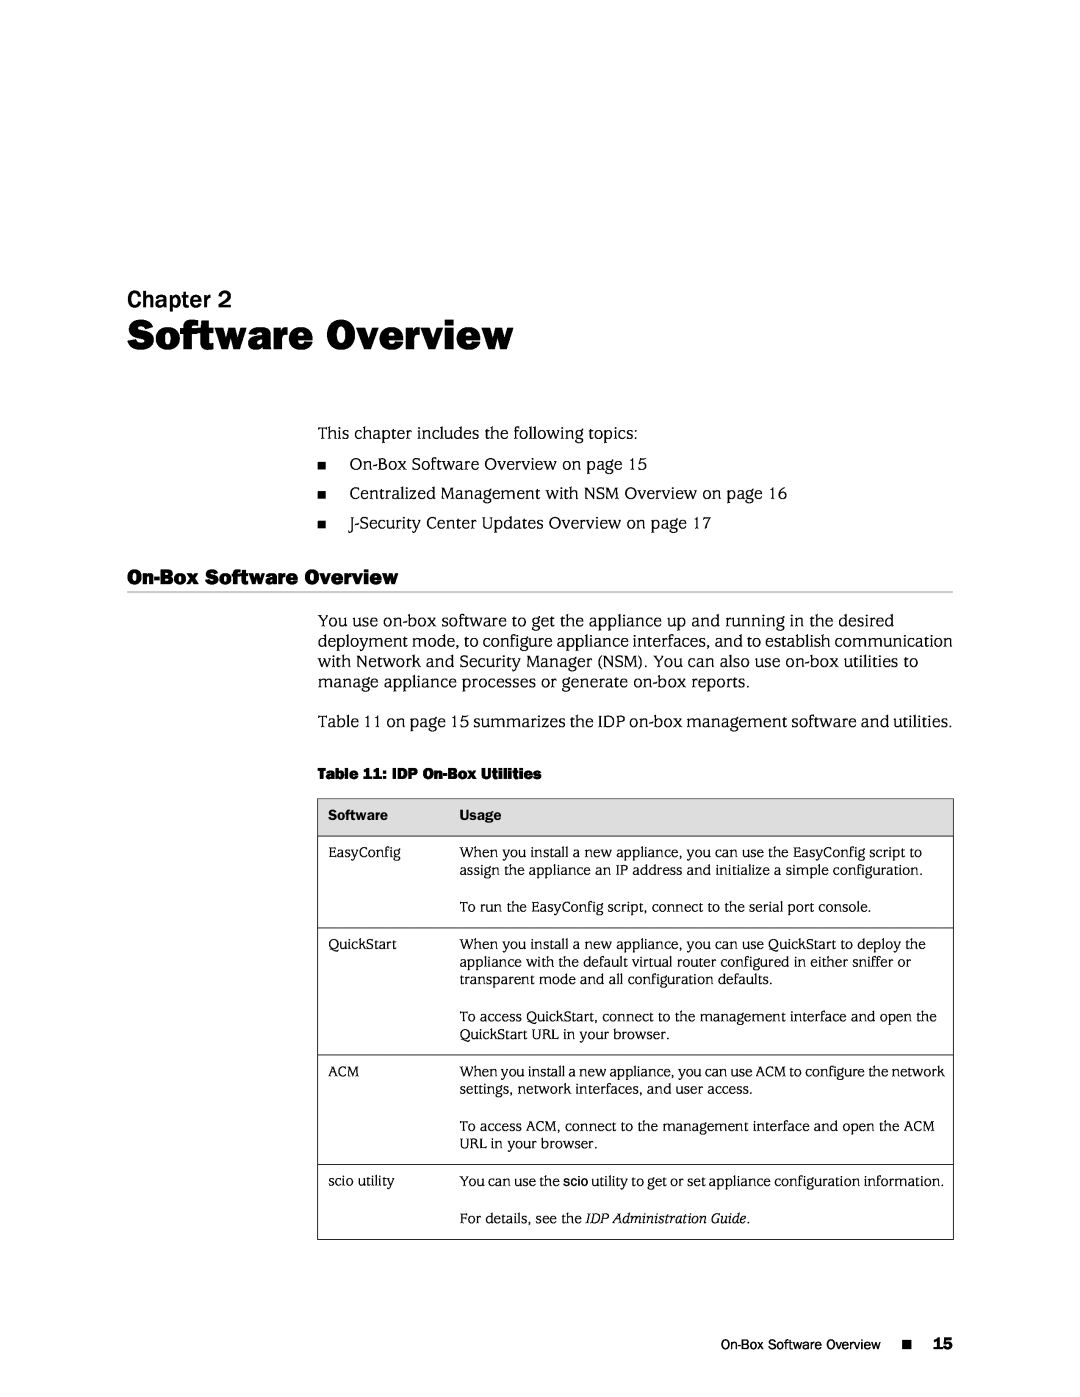 Juniper Networks IDP250 manual On-BoxSoftware Overview, Chapter 